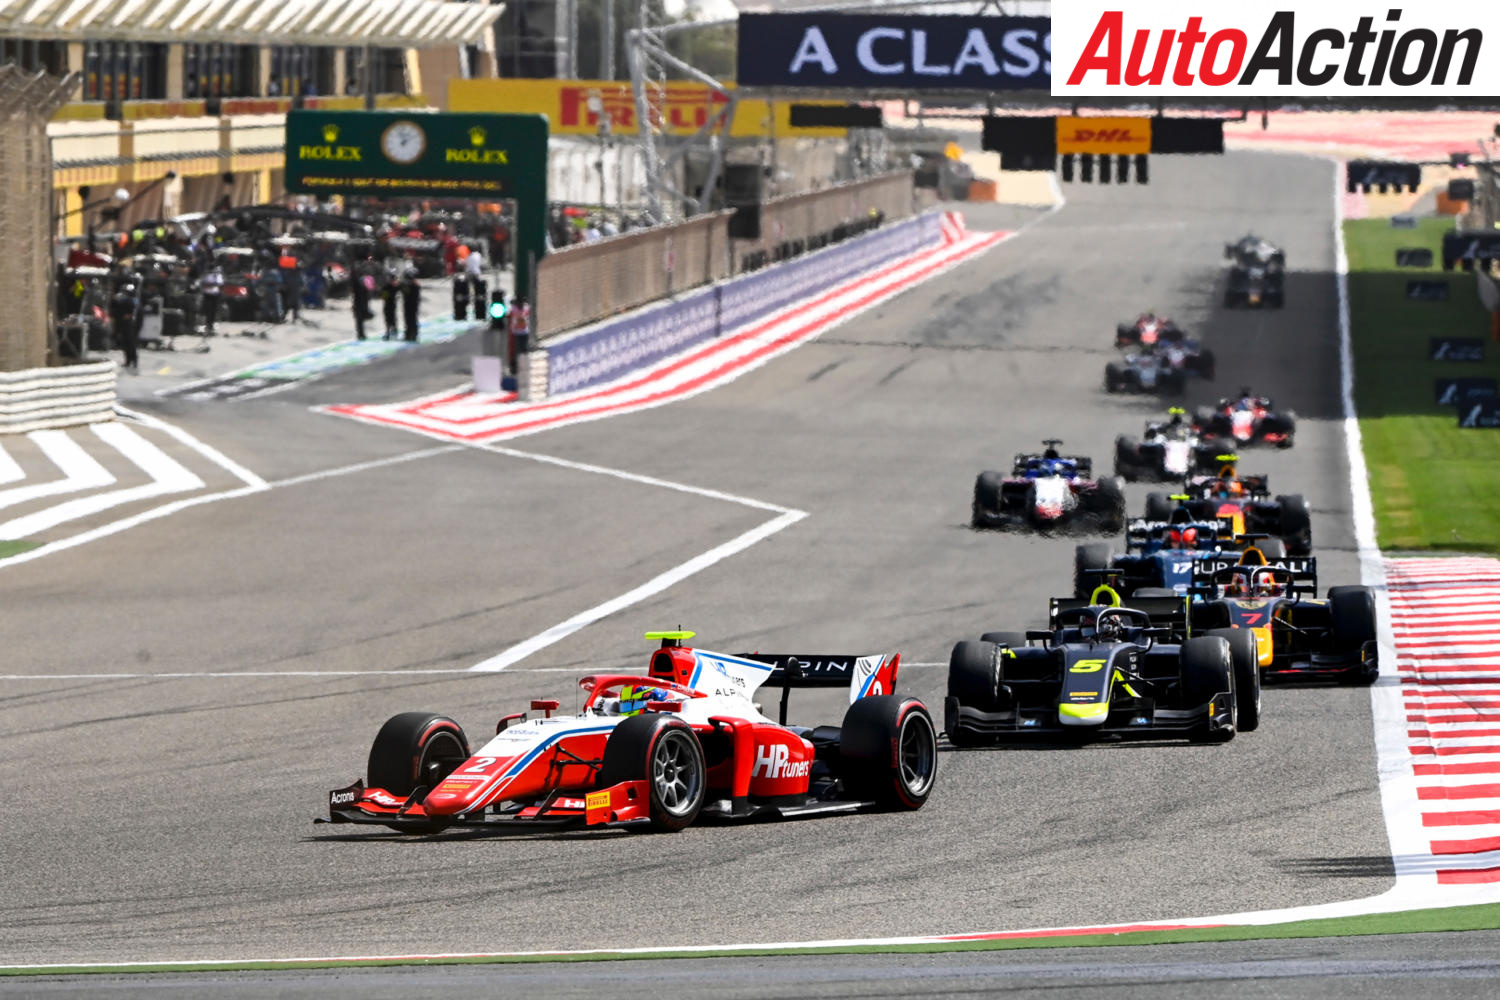 More F2 races in 2022 - Image: Motorsport Images